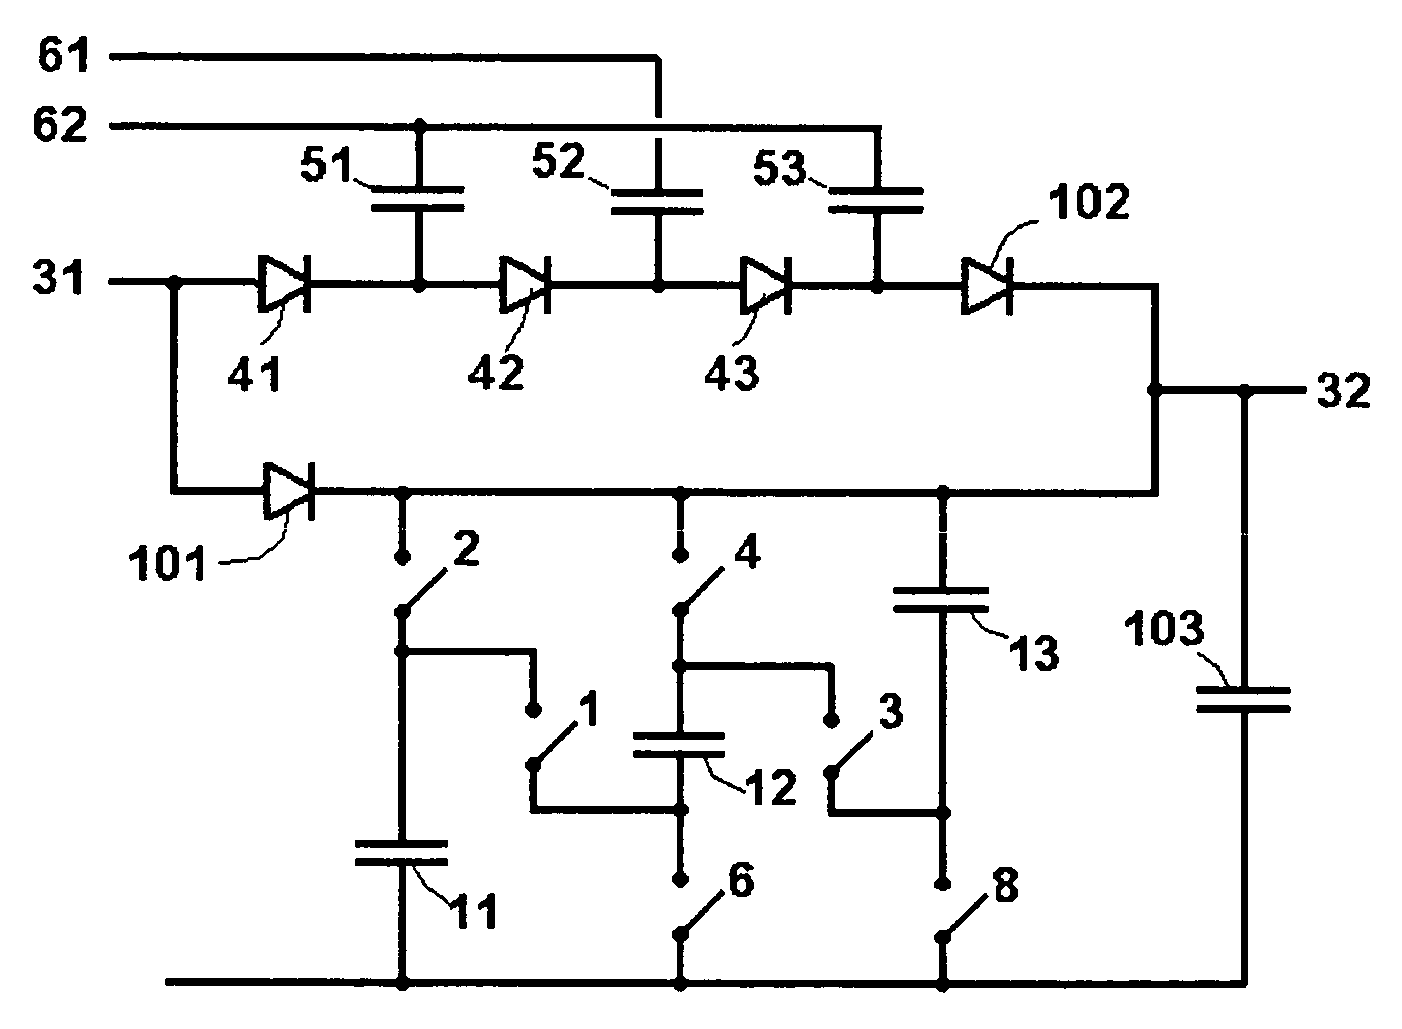 Voltage multiplier with charge recovery